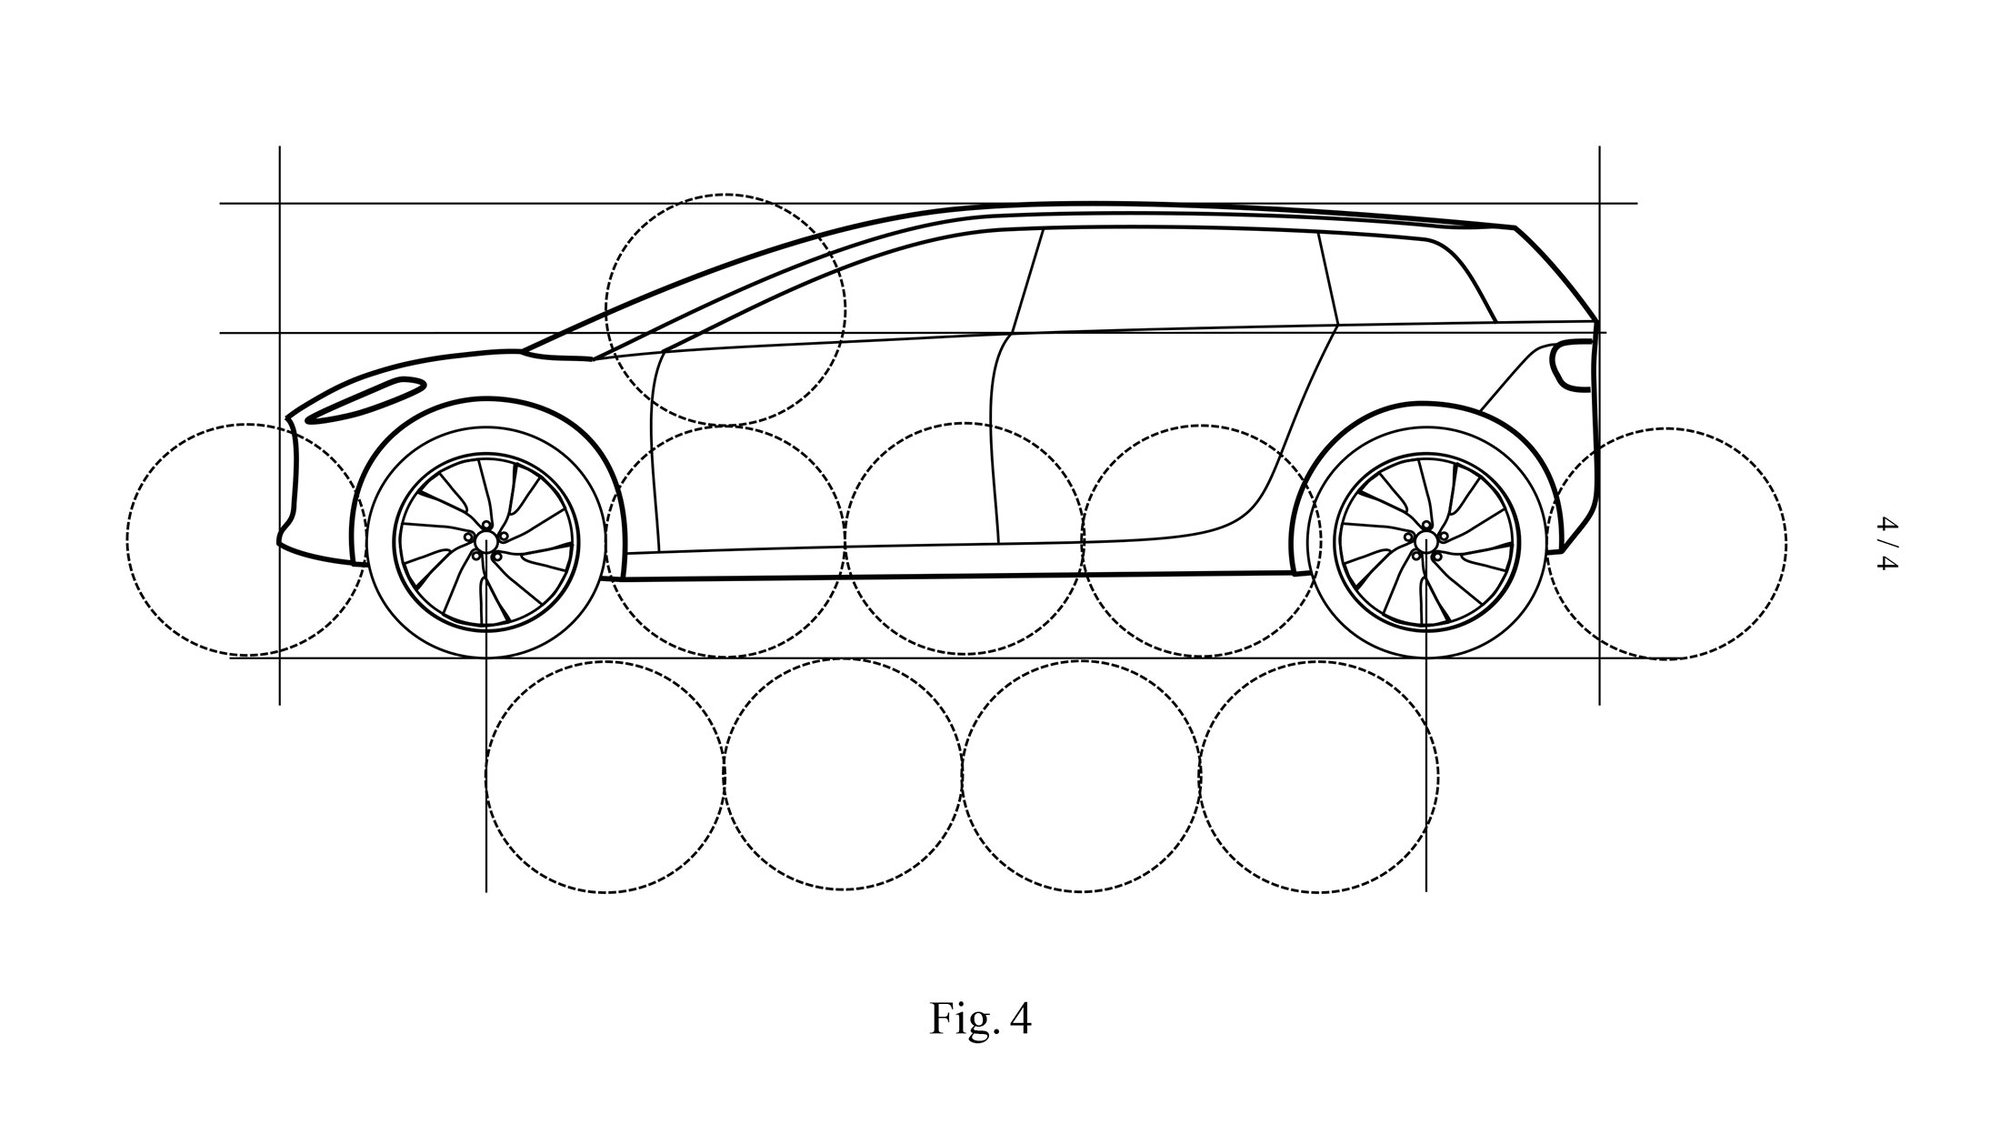 Patent drawing for Dyson electric car due in 2021